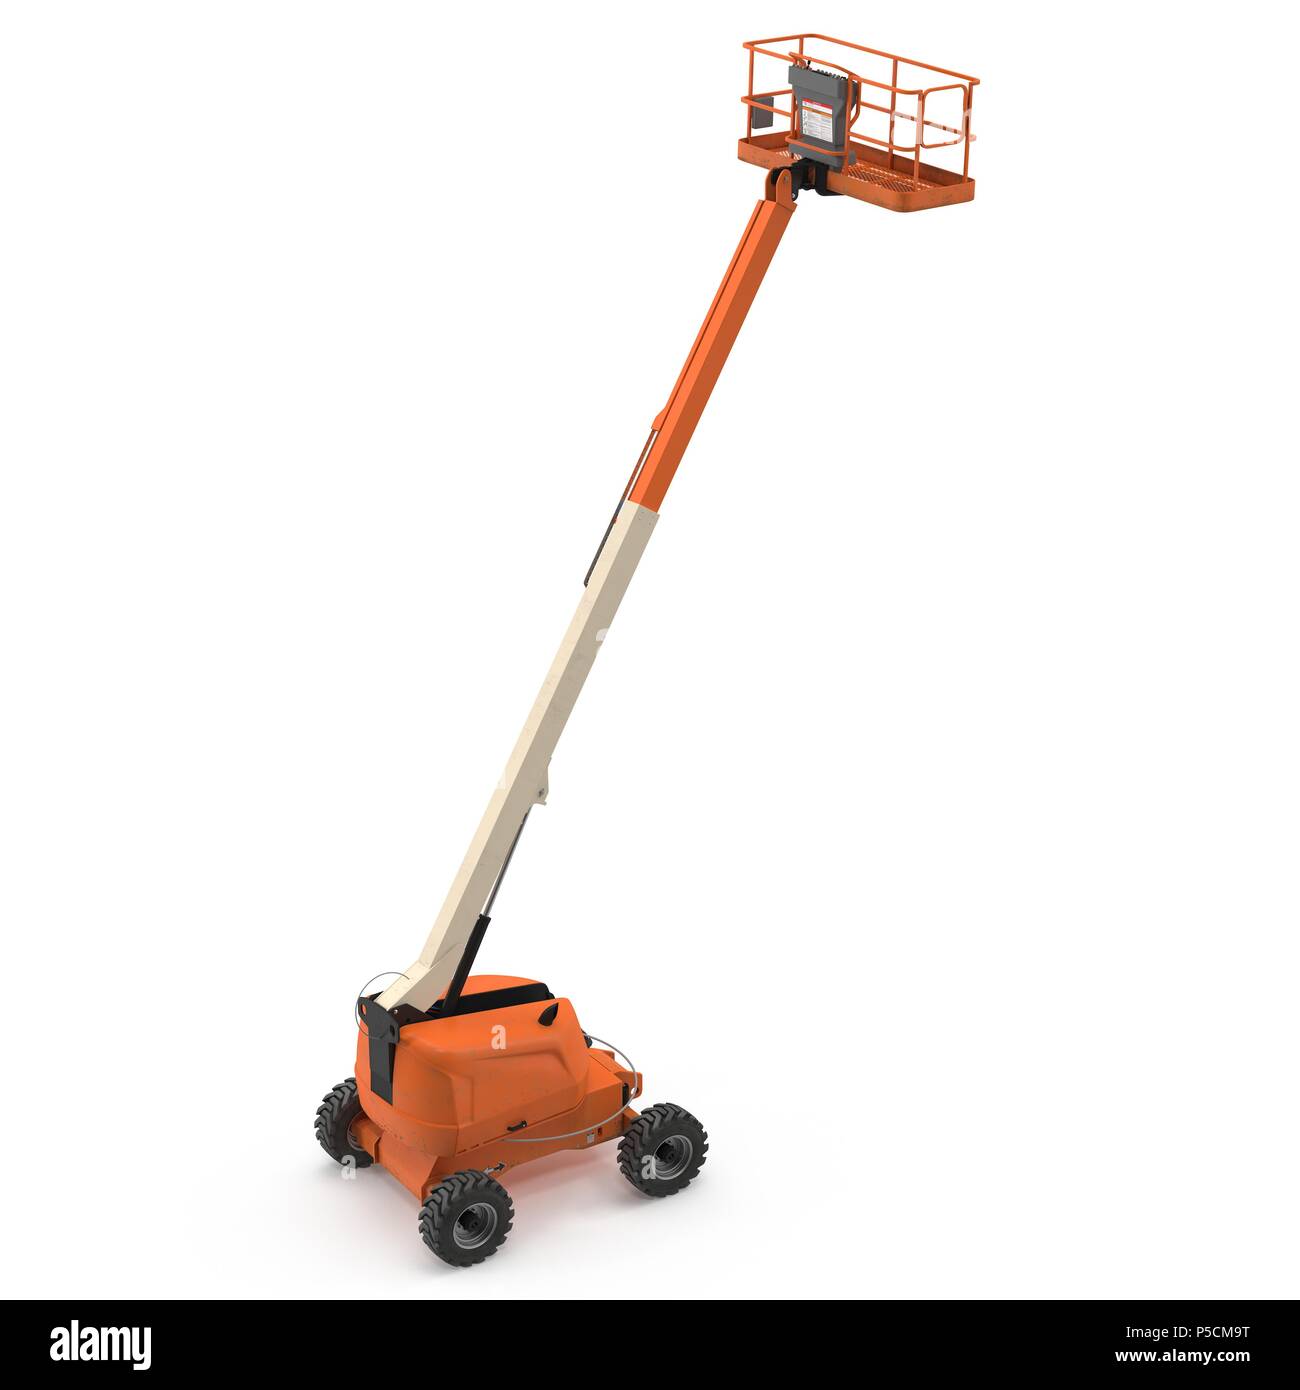 Self propelled wheeled boom lift with telescoping boom and basket on white. 3D illustration Stock Photo